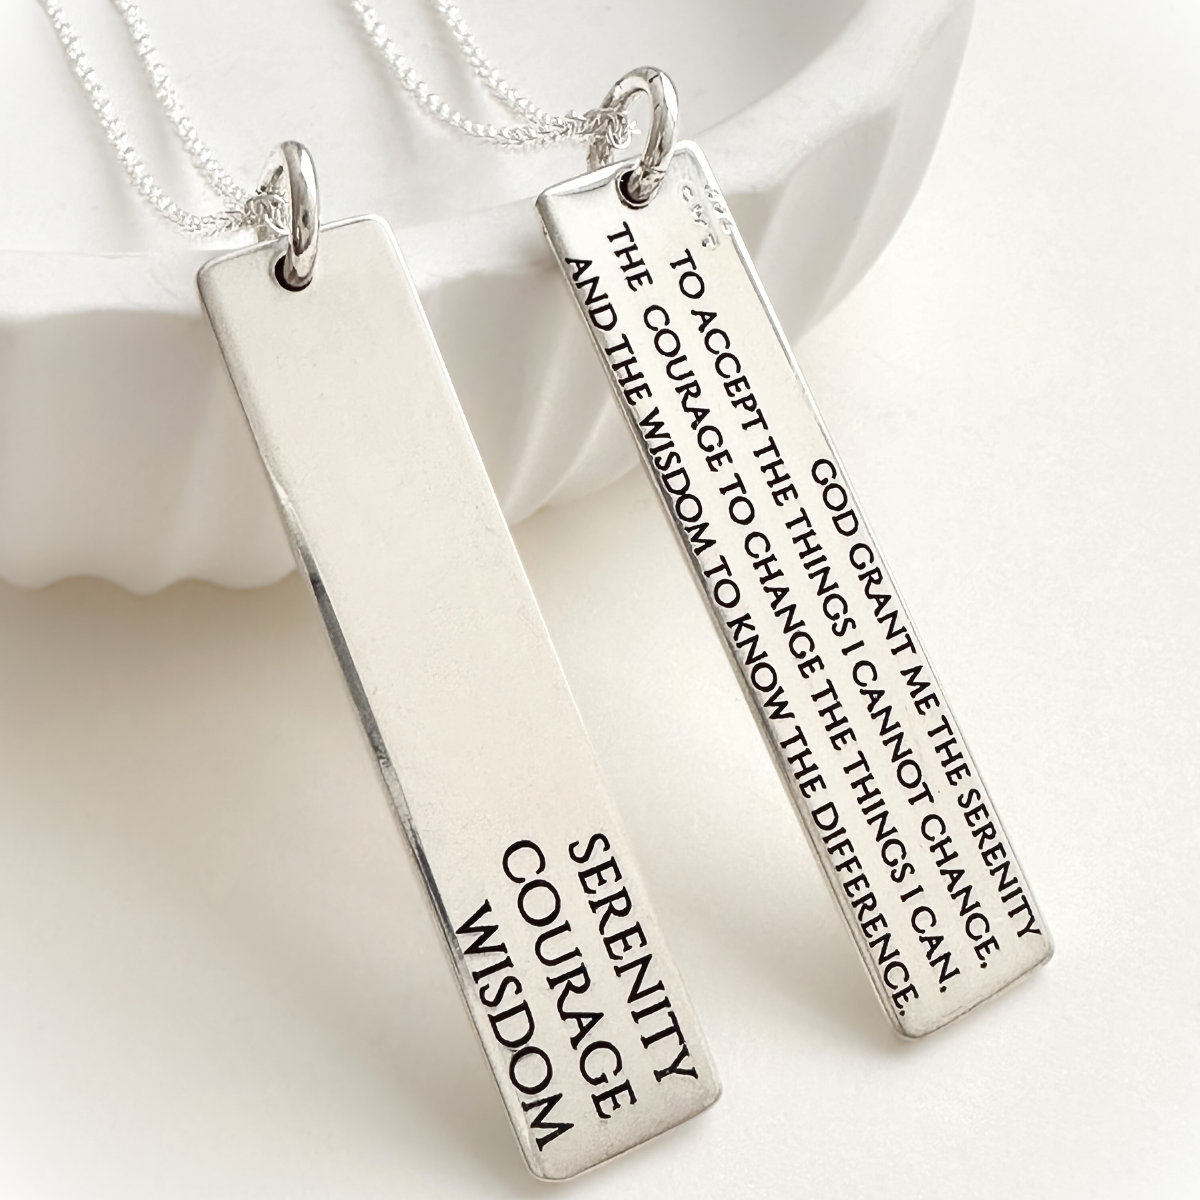 Serenity Prayer Jewelry & Gifts | Recovery Jewelry | Made in the